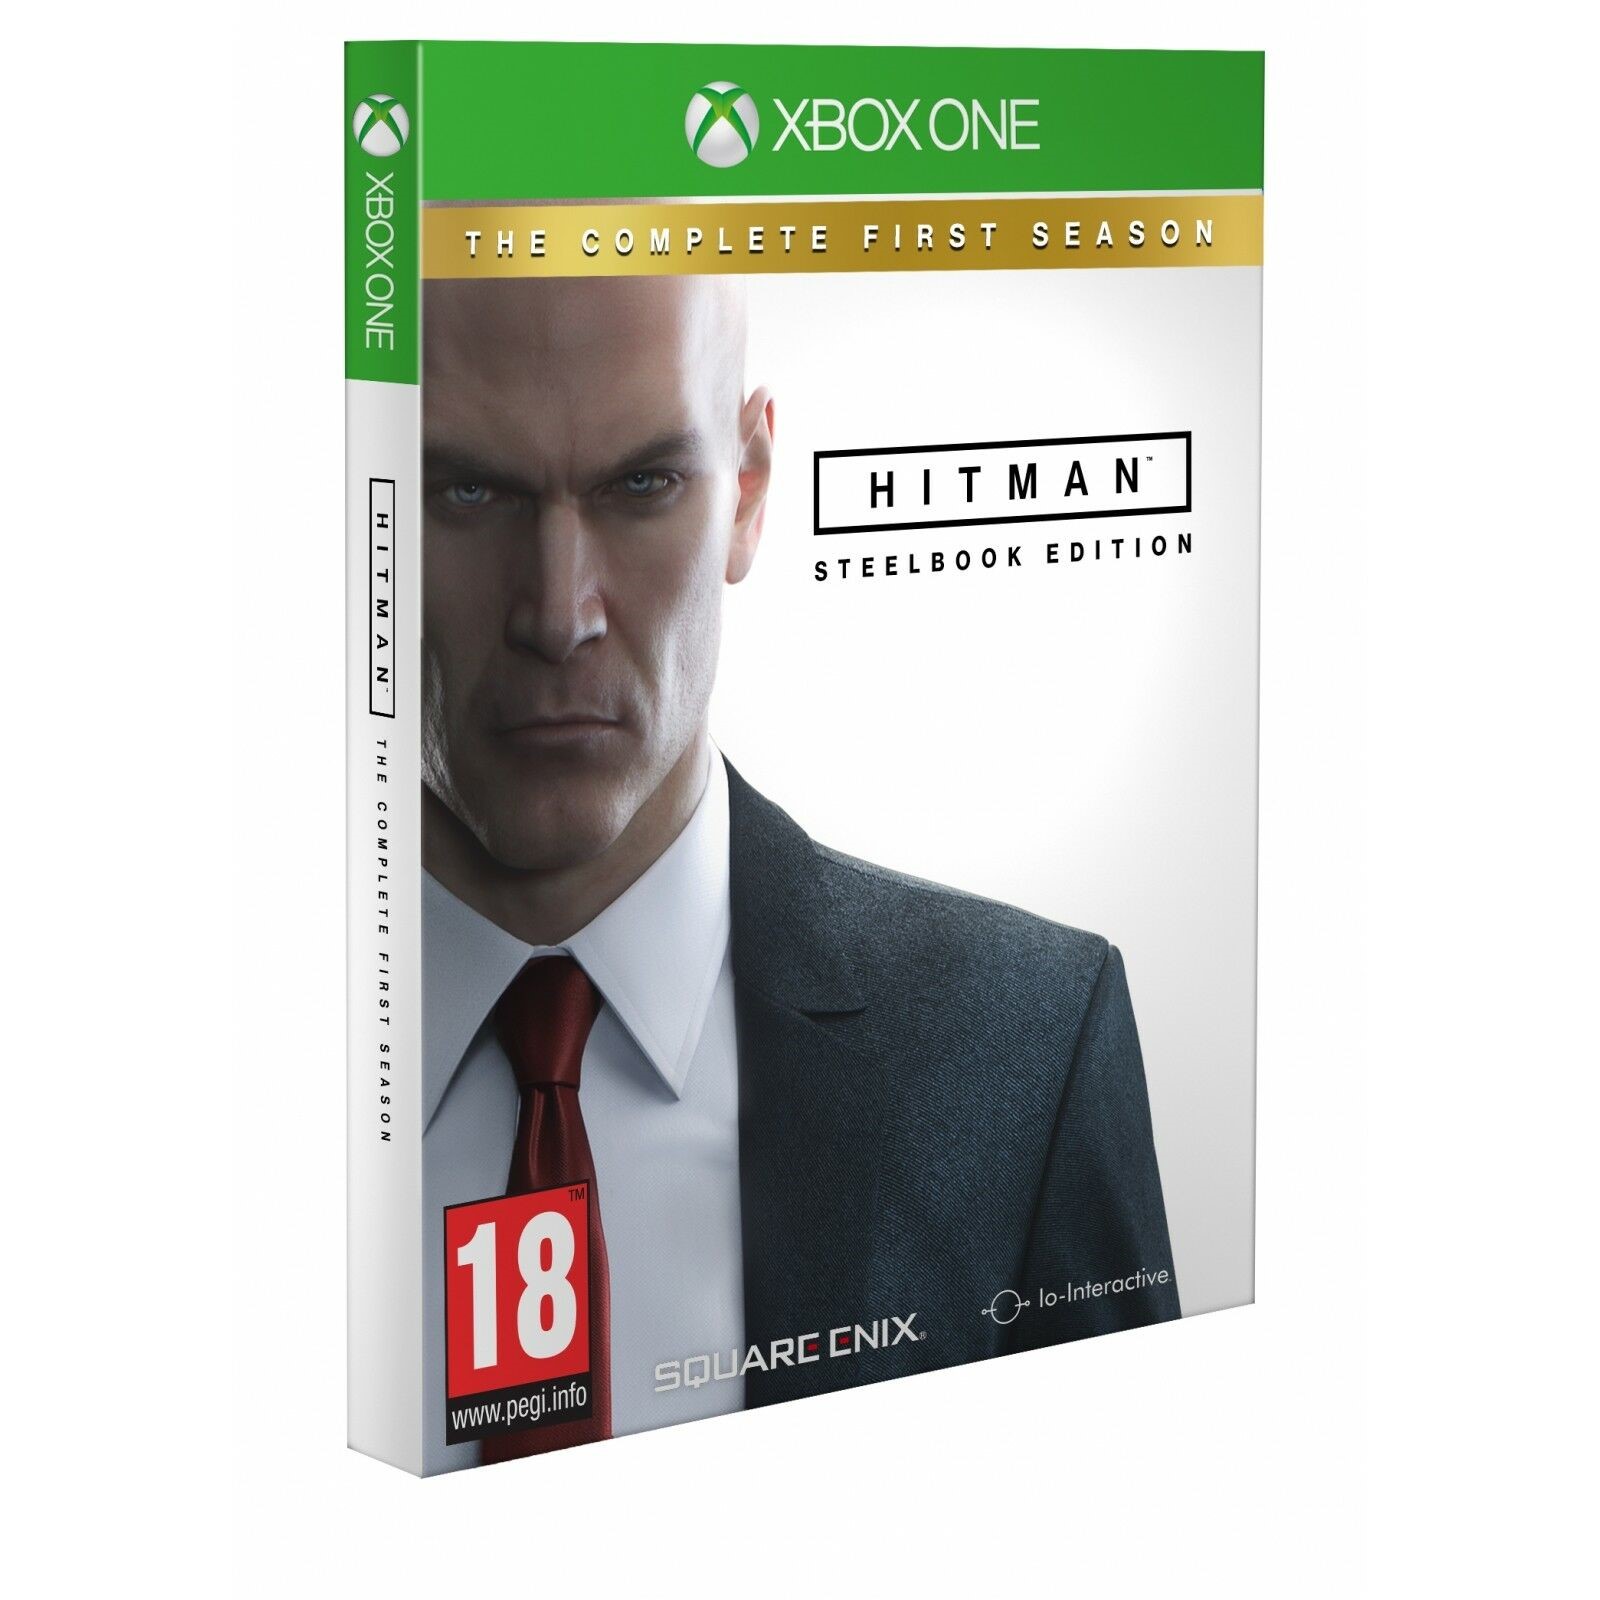 HITMAN The Complete First Season XBOX ONE